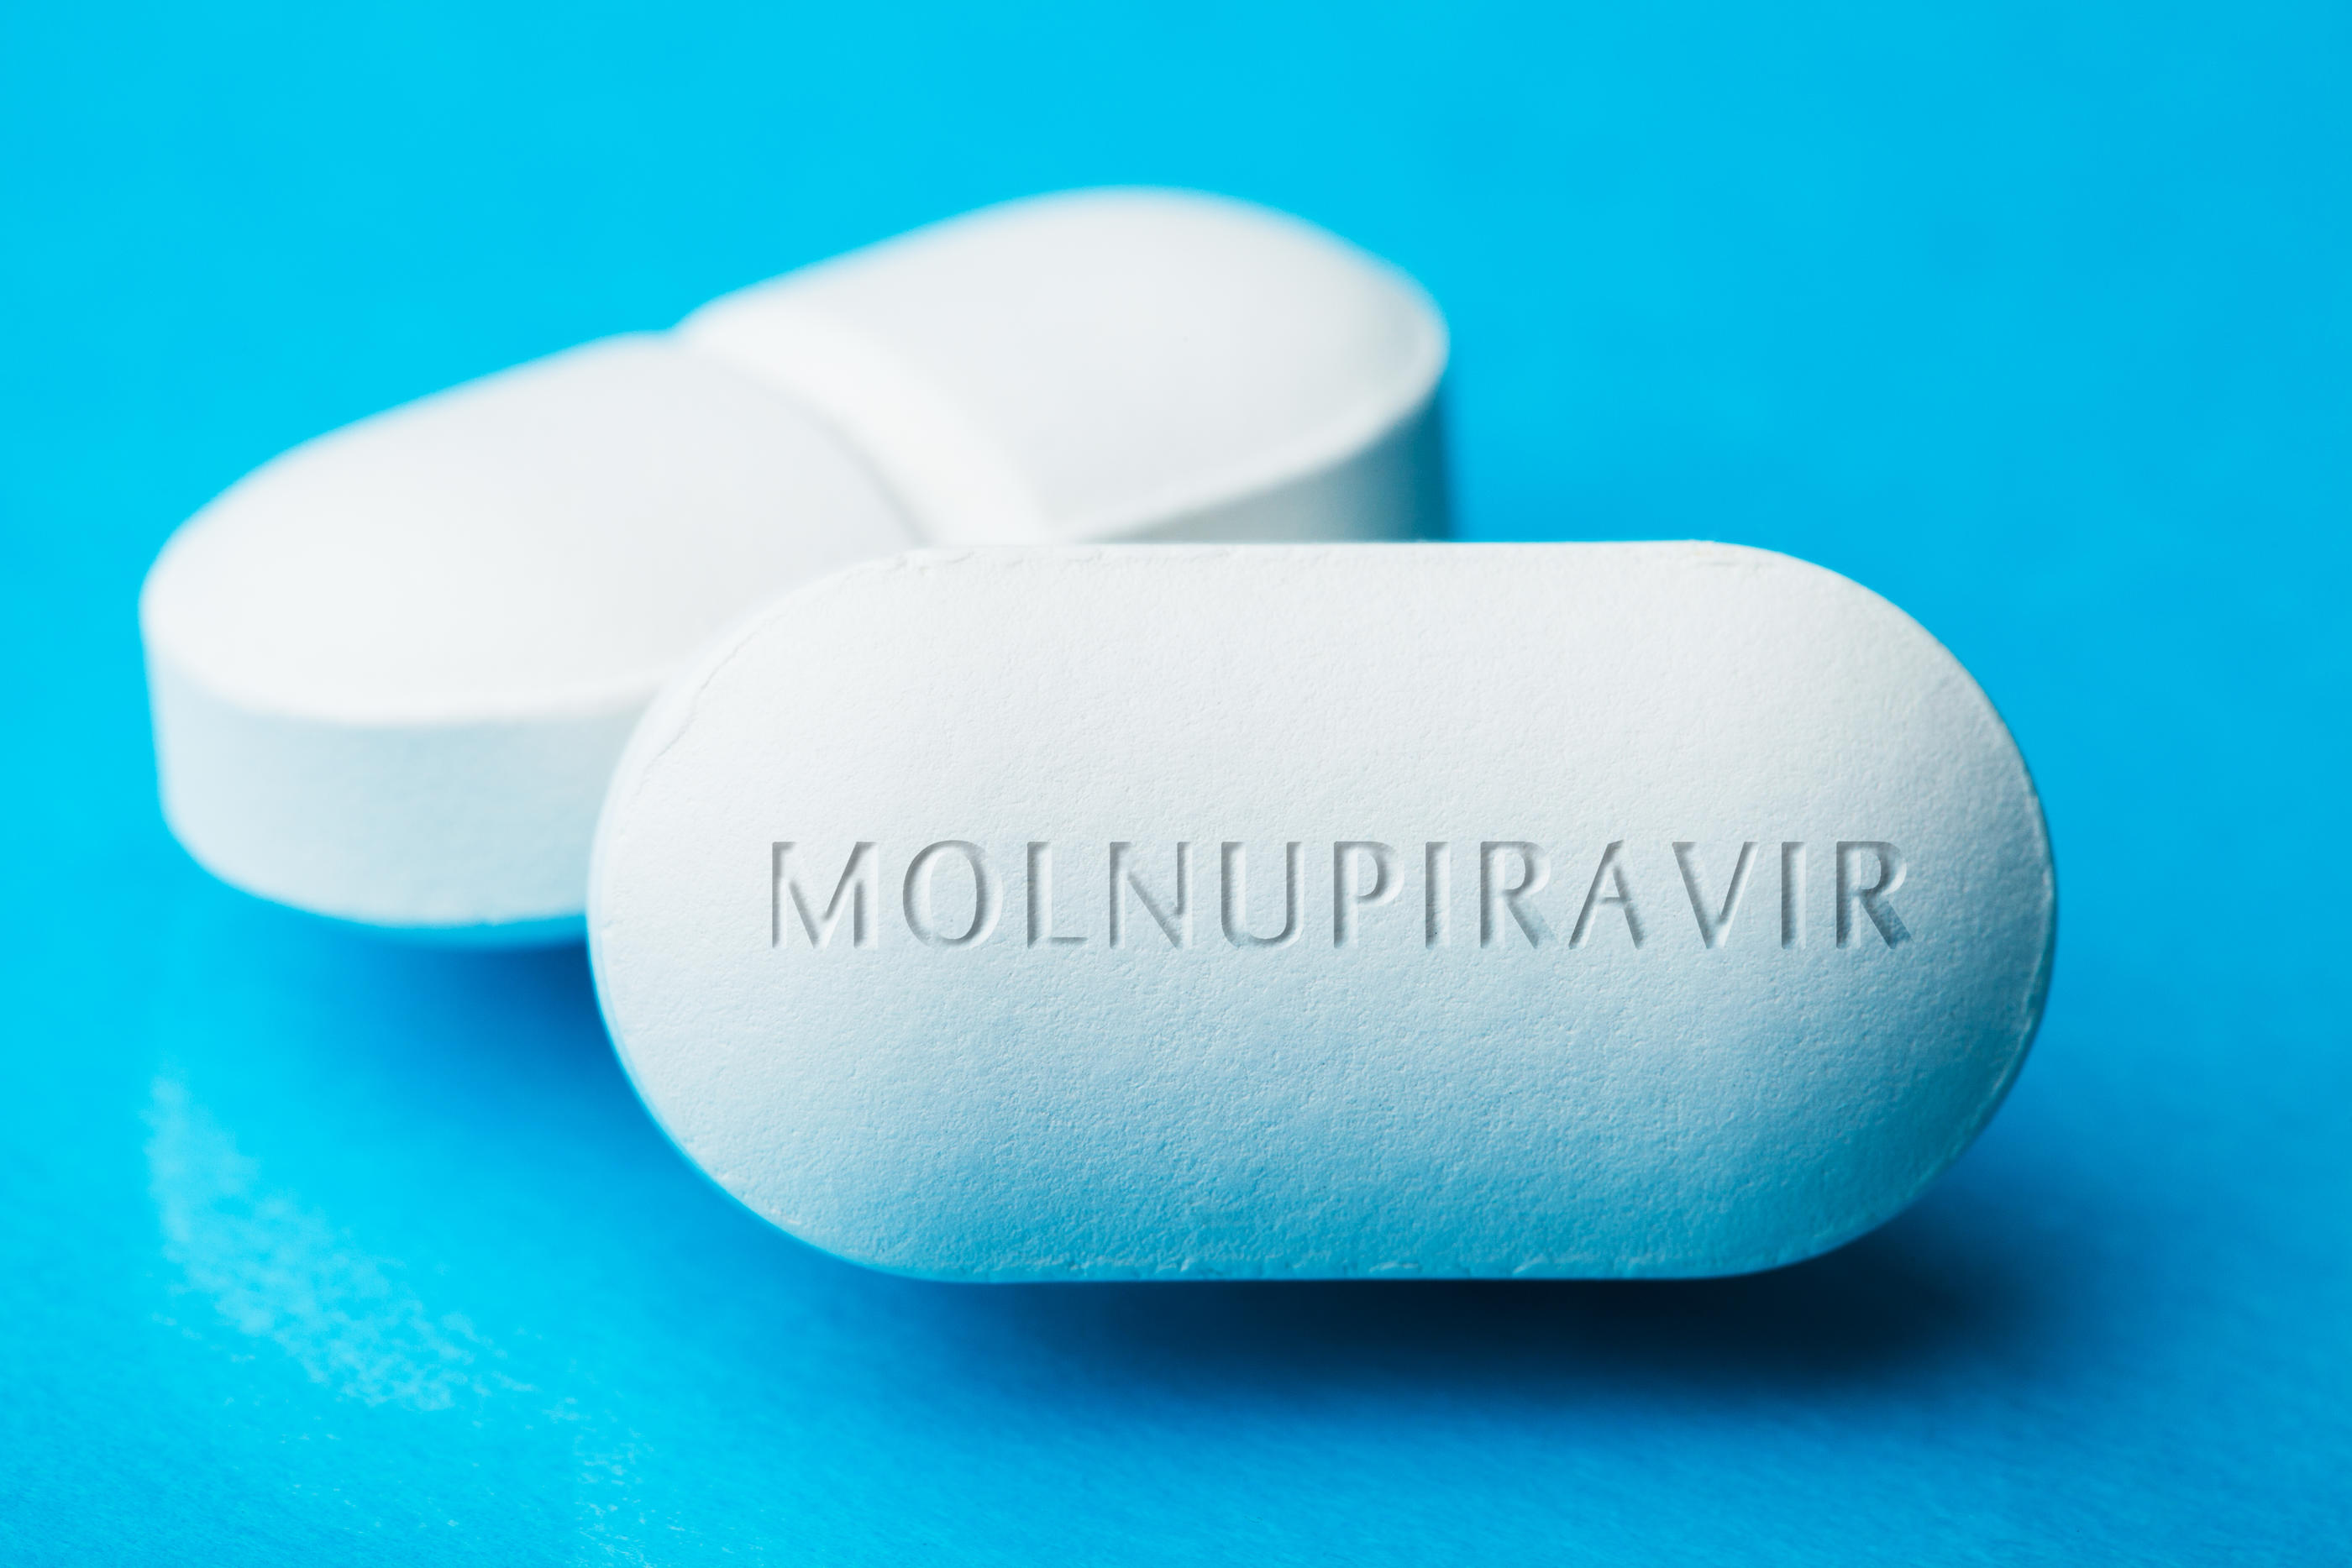 COVID-19 experimental antiviral drug MOLNUPIRAVIR, two white pills with letters engraved on side, potential experimental WHO Coronavirus cure, pandemic outbreak crisis, isolated on blue background